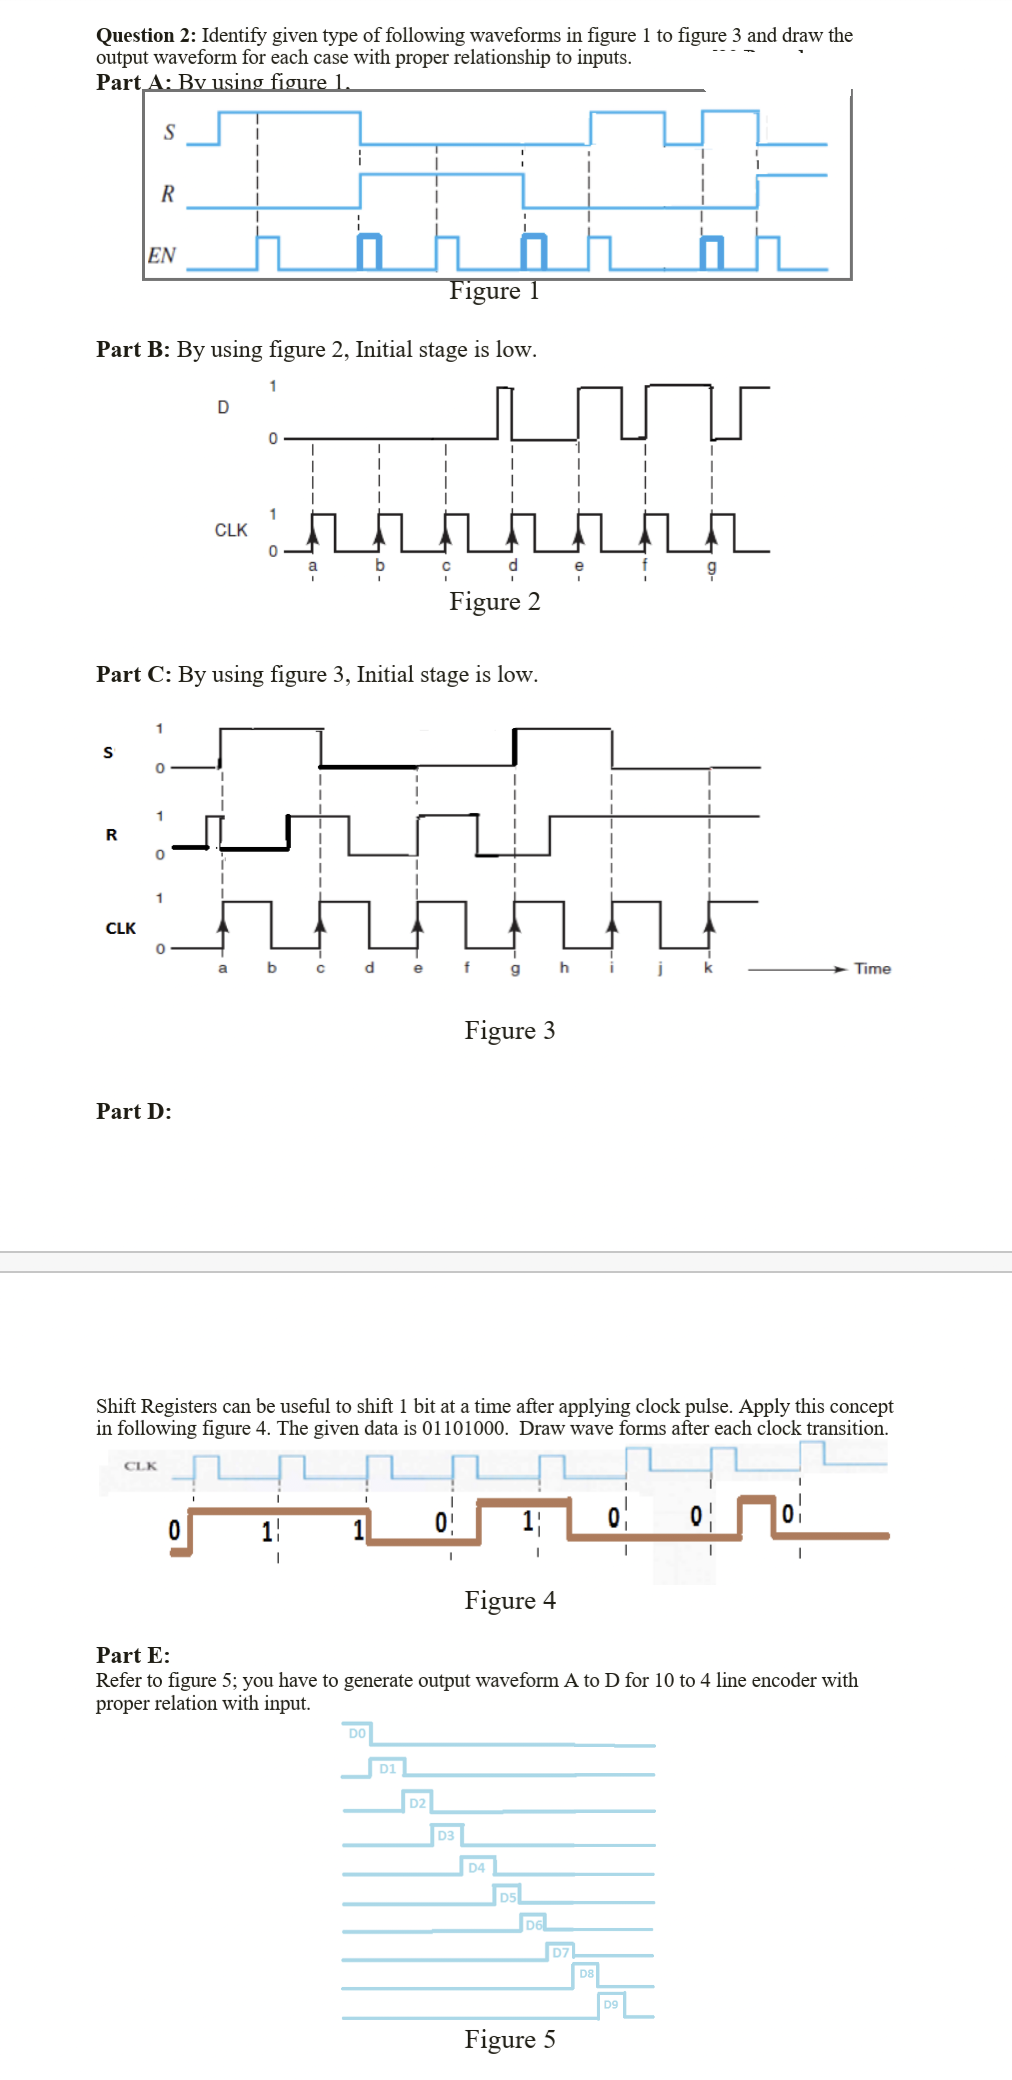 Question 2: Identify given type of following waveforms in figure 1 to figure 3 and draw the
output waveform for each case with proper relationship to inputs.
Part A: By using figure 1
S
R
EN
Figure 1
Part B: By using figure 2, Initial stage is low.
1
CLK
d
Figure 2
Part C: By using figure 3, Initial stage is low.
S
R
CLK
b c d e
f
gh
i j
Time
Figure 3
Part D:
Shift Registers can be useful to shift 1 bit at a time after applying clock pulse. Apply this concept
in following figure 4. The given data is 01101000. Draw wave forms after each clock transition.
CLK
1!
Figure 4
Part E:
Refer to figure 5; you have to generate output waveform A to D for 10 to 4 line encoder with
proper relation with input.
DO
D1
D2
D3
D4
D5
D6
D8
D9
Figure 5
